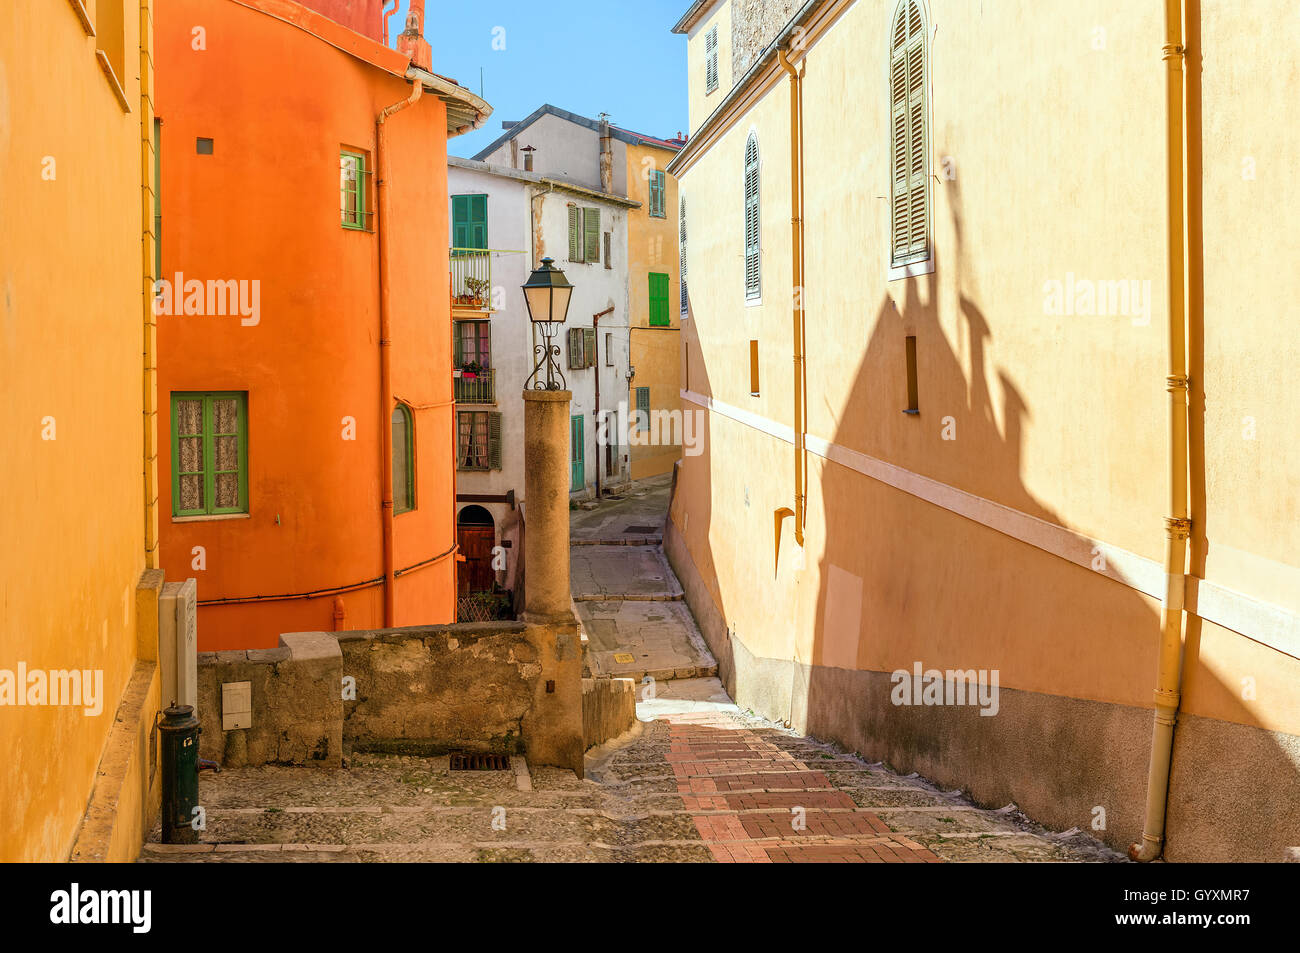 Narrow street among colorful houses in old town of Menton, France. Stock Photo